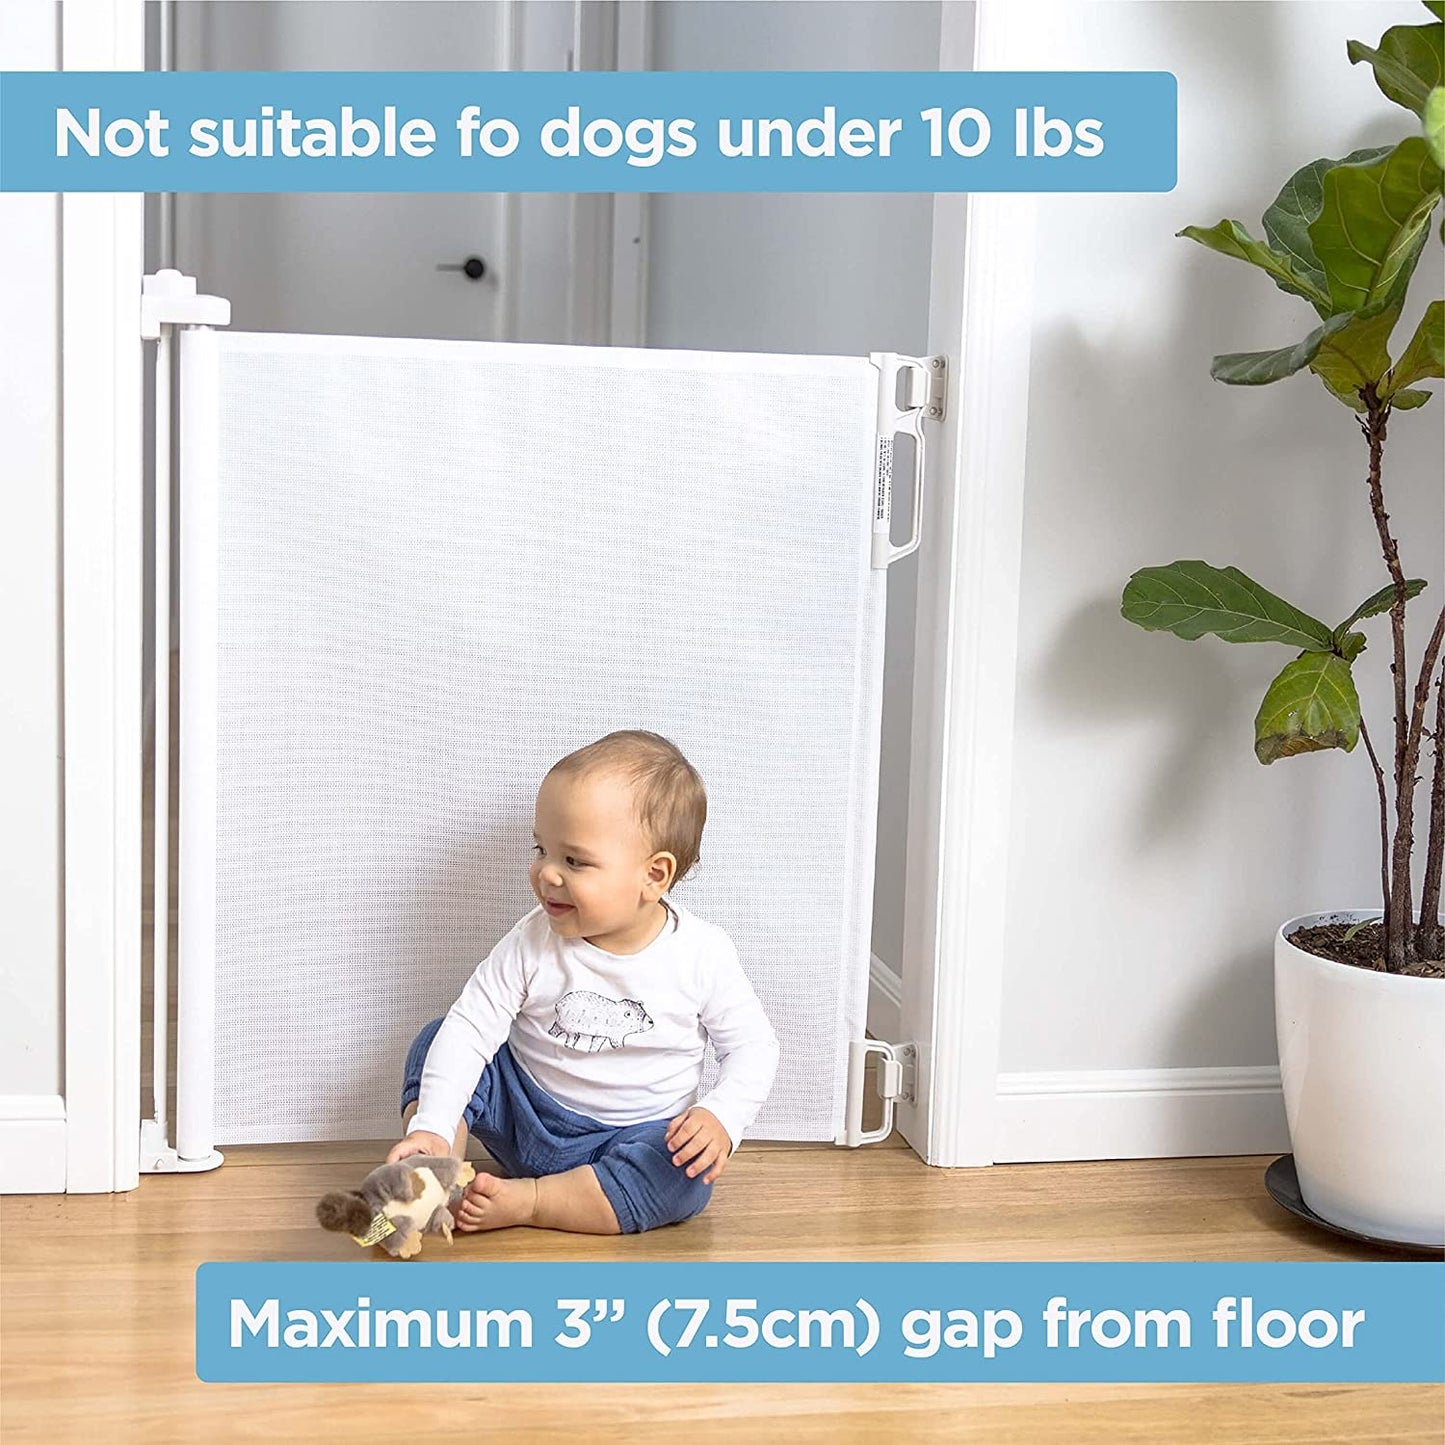 Perma Child Safety Indoor/Outdoor Retractable Baby Gate 33" Tall, Extends to 71" Wide, White